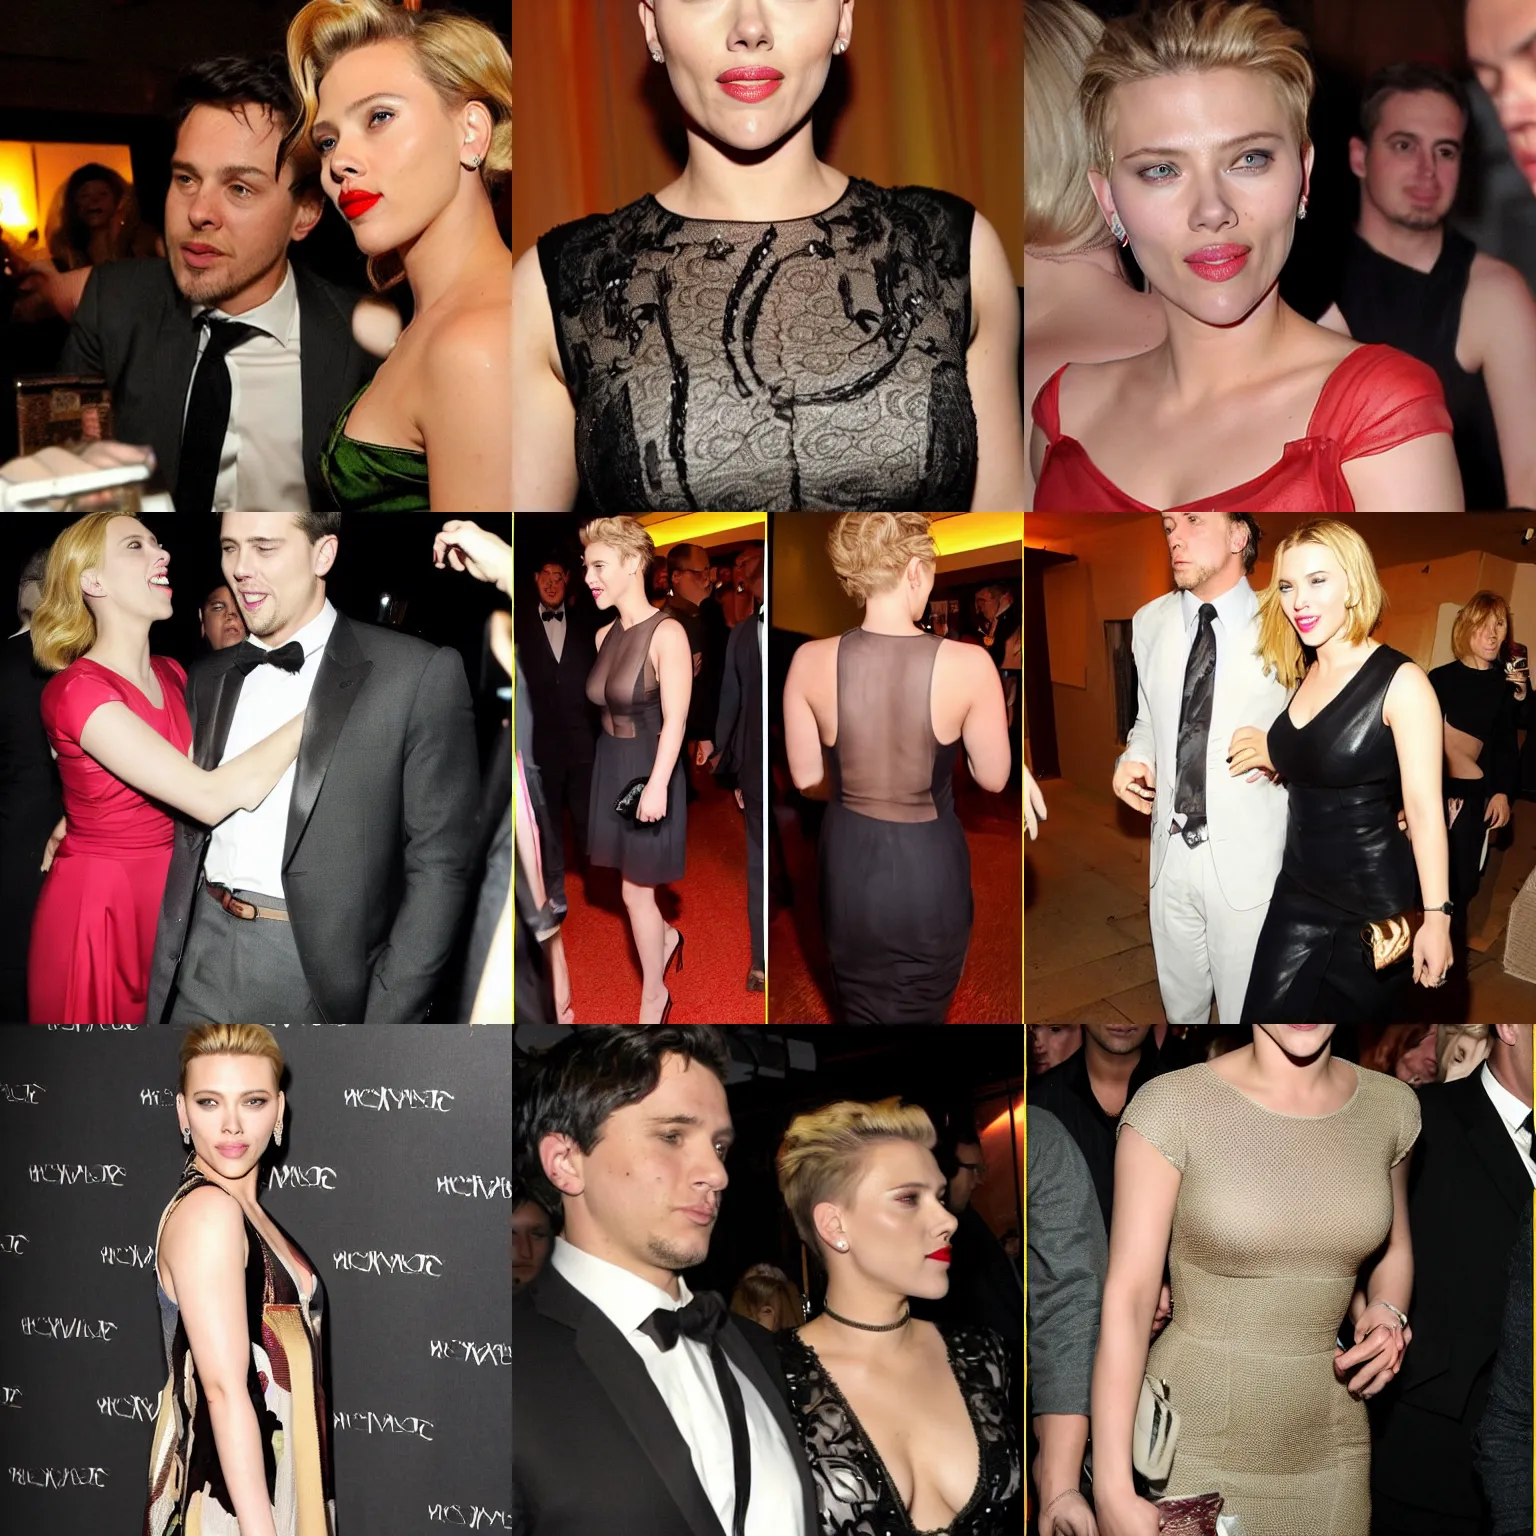 Prompt: scarlett johanson at the afterparty, bad photos